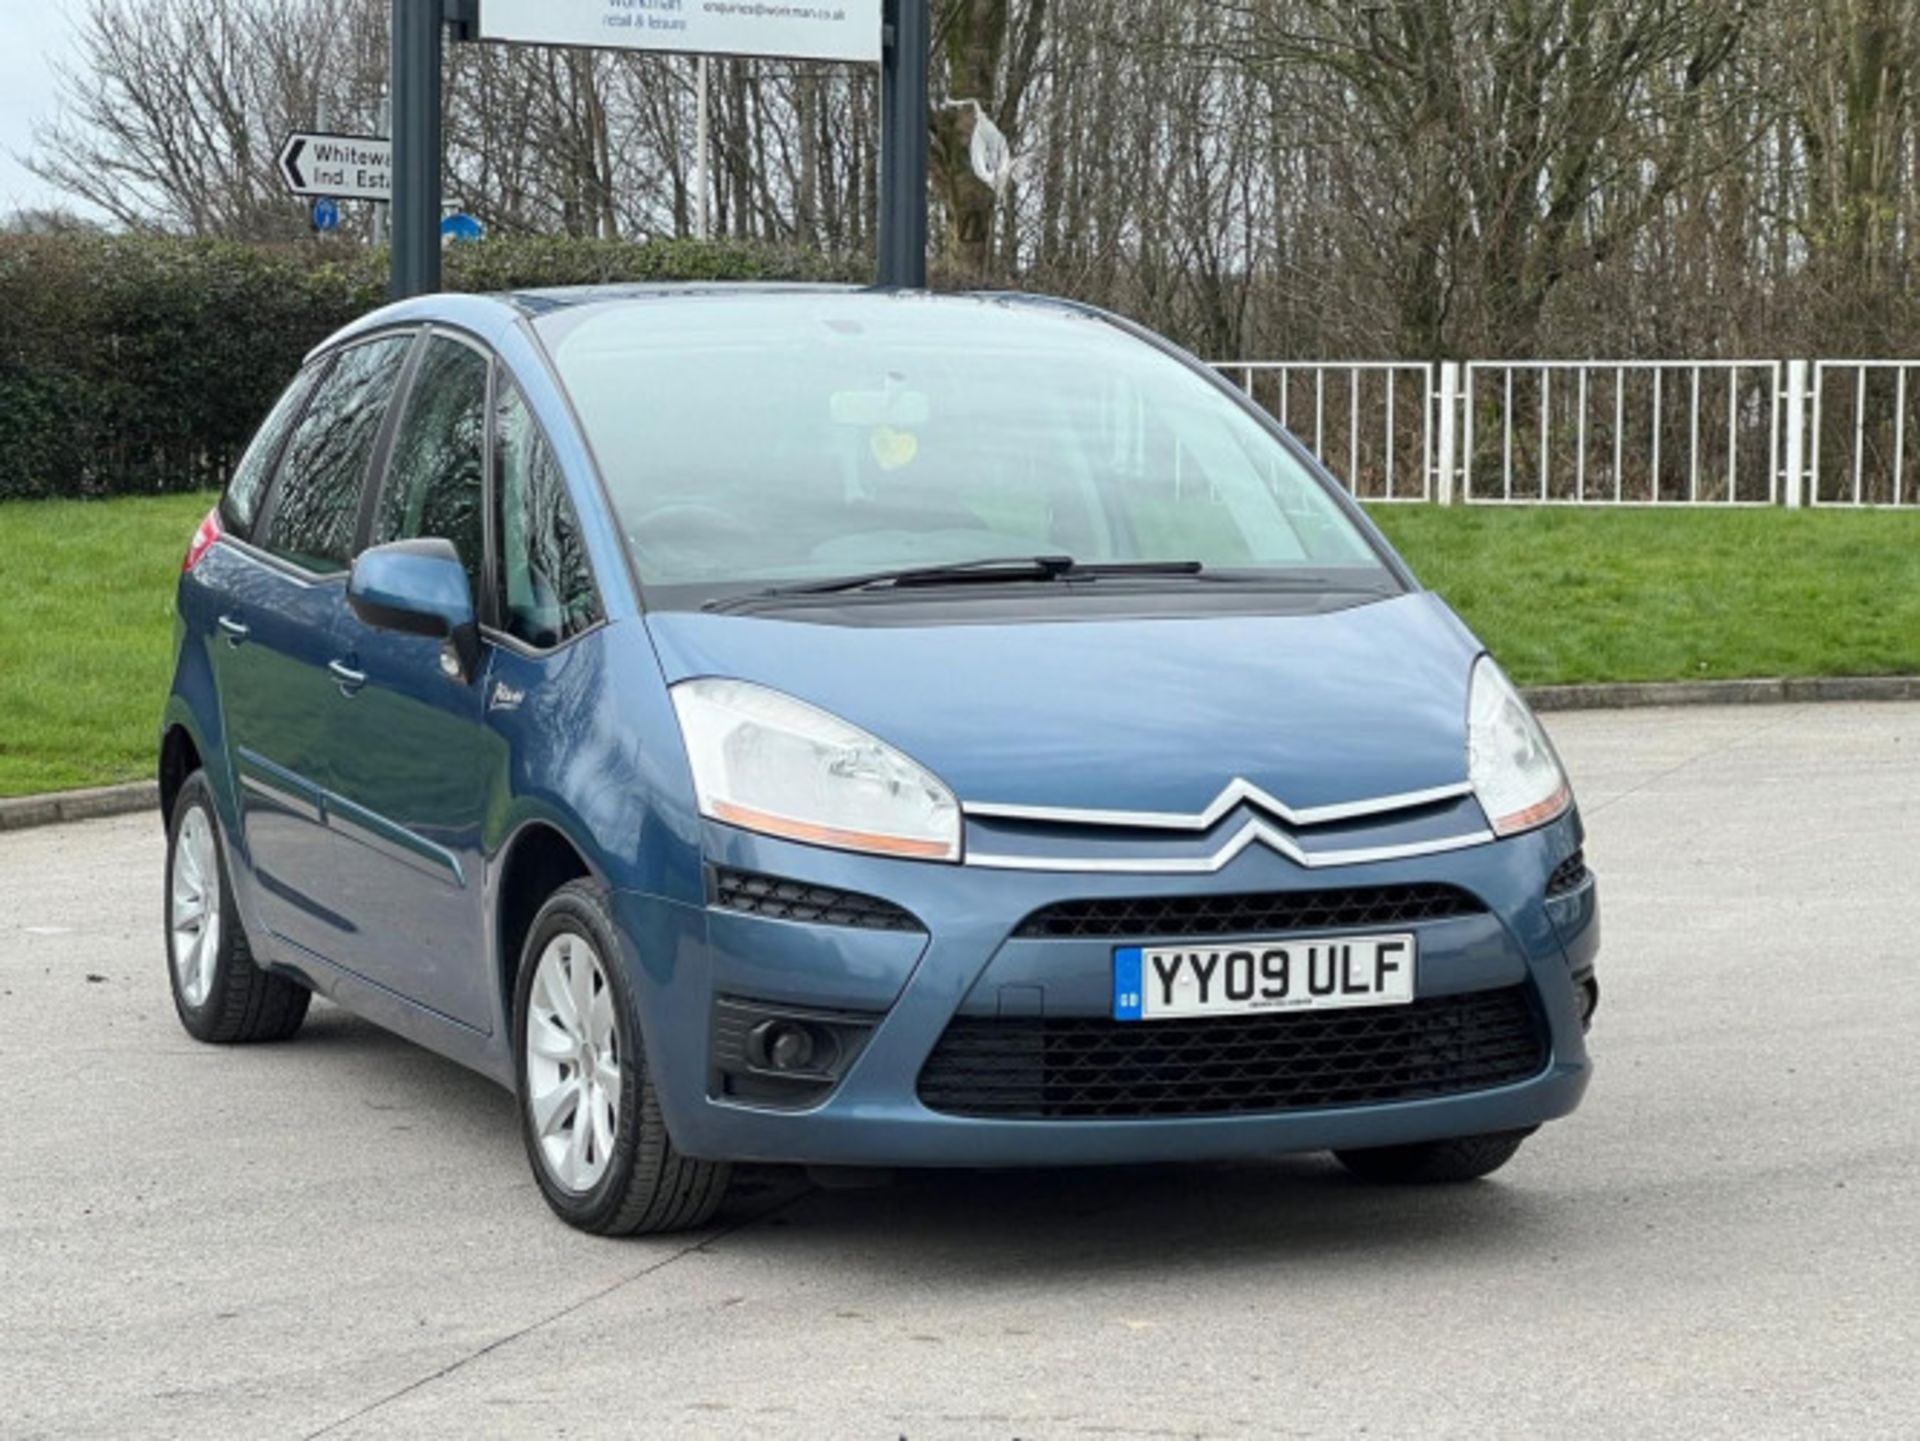 2009 CITROEN C4 PICASSO 1.6 HDI VTR+ EGS6 5DR >>--NO VAT ON HAMMER--<< - Image 121 of 123